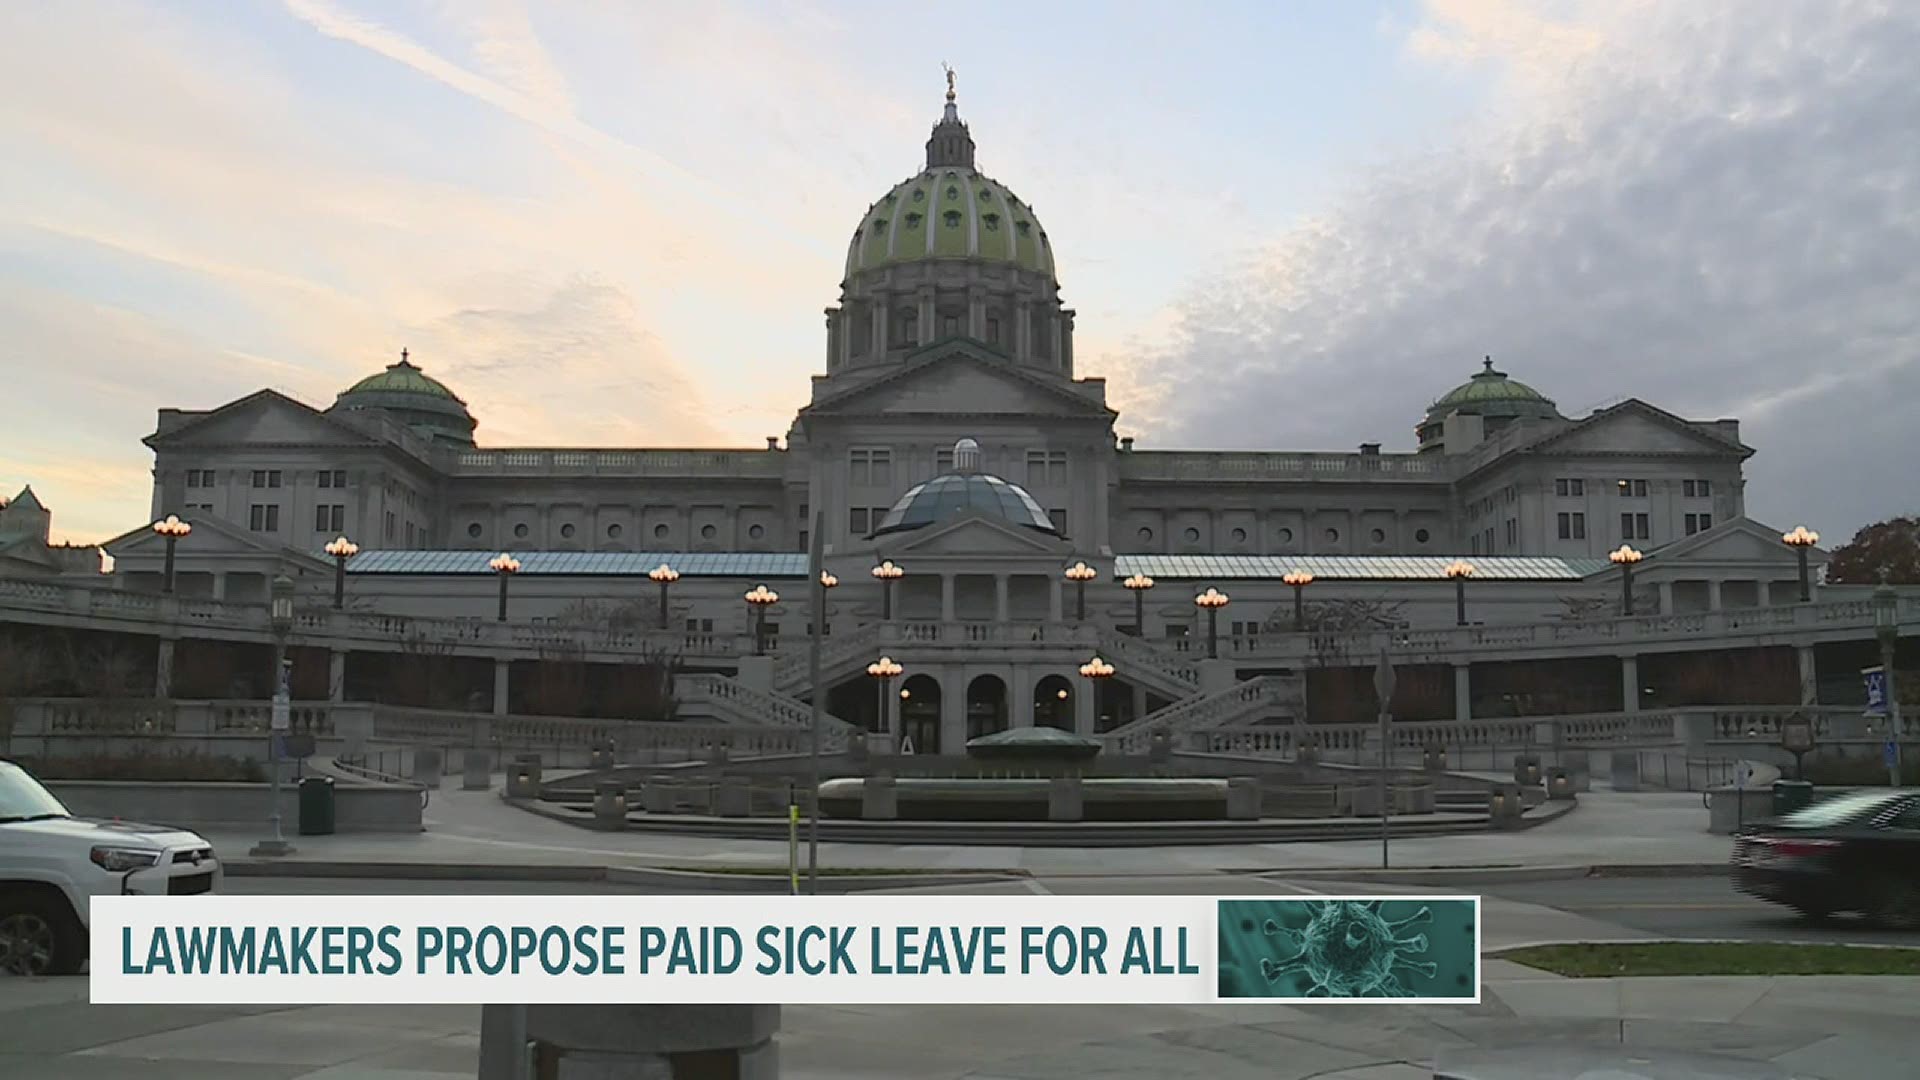 Without paid sick leave, some lawmakers believe workers are left with two unfavorable options: Go to work sick and possibly infect others or stay home without pay.